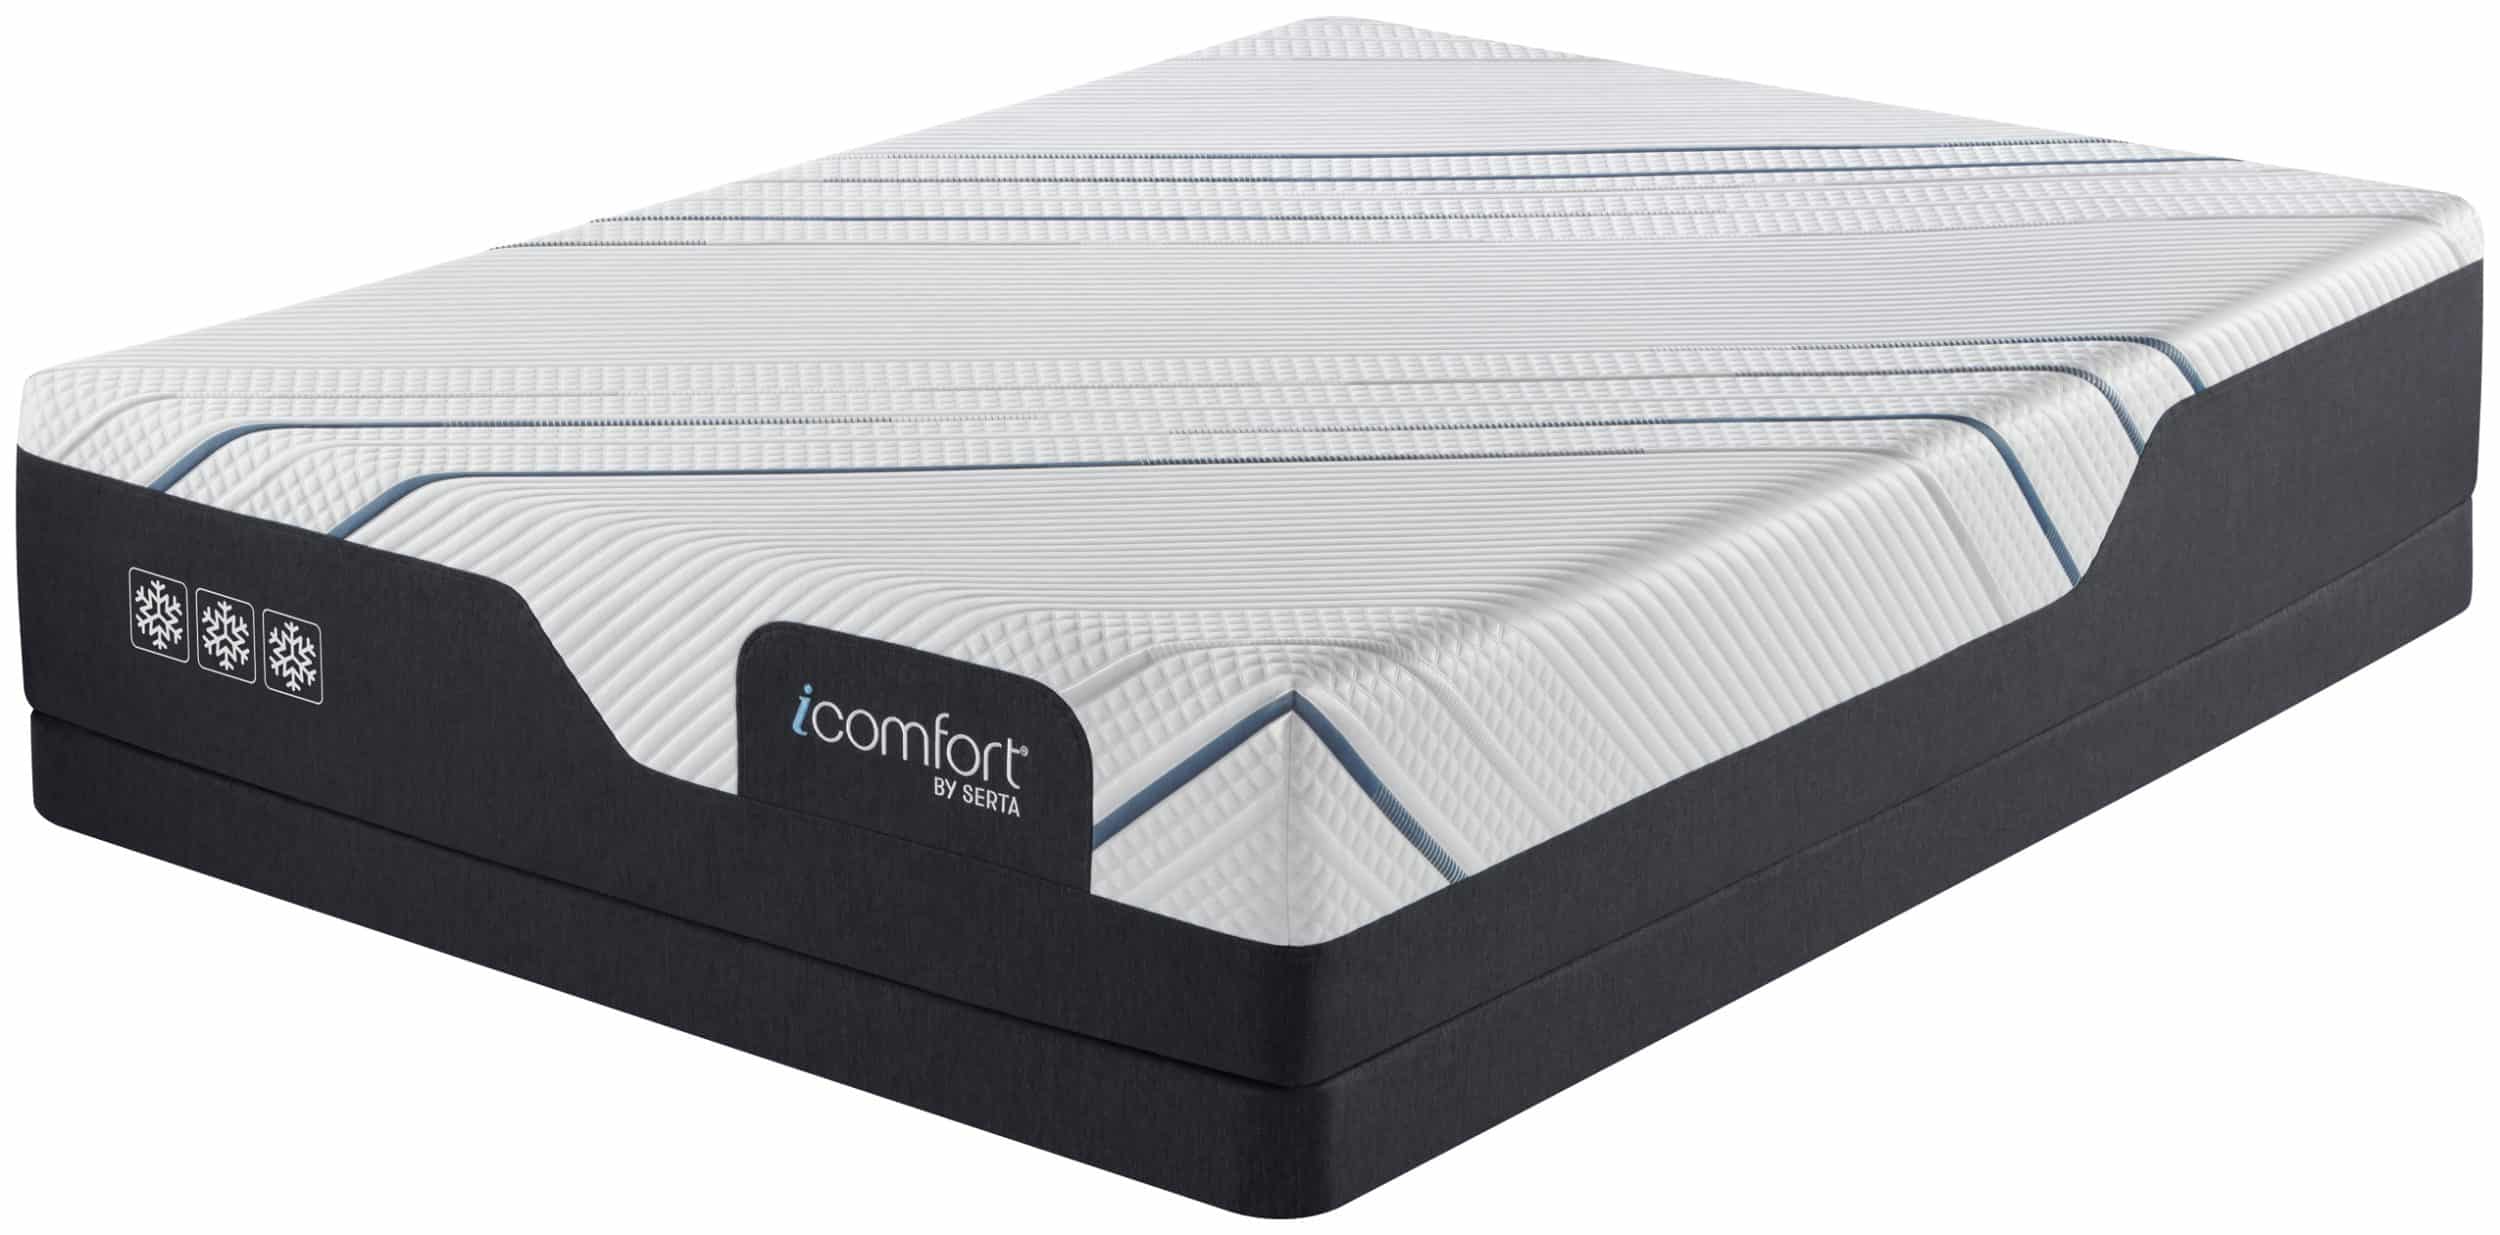 White and blue striped iComfort cooling mattress from Serta